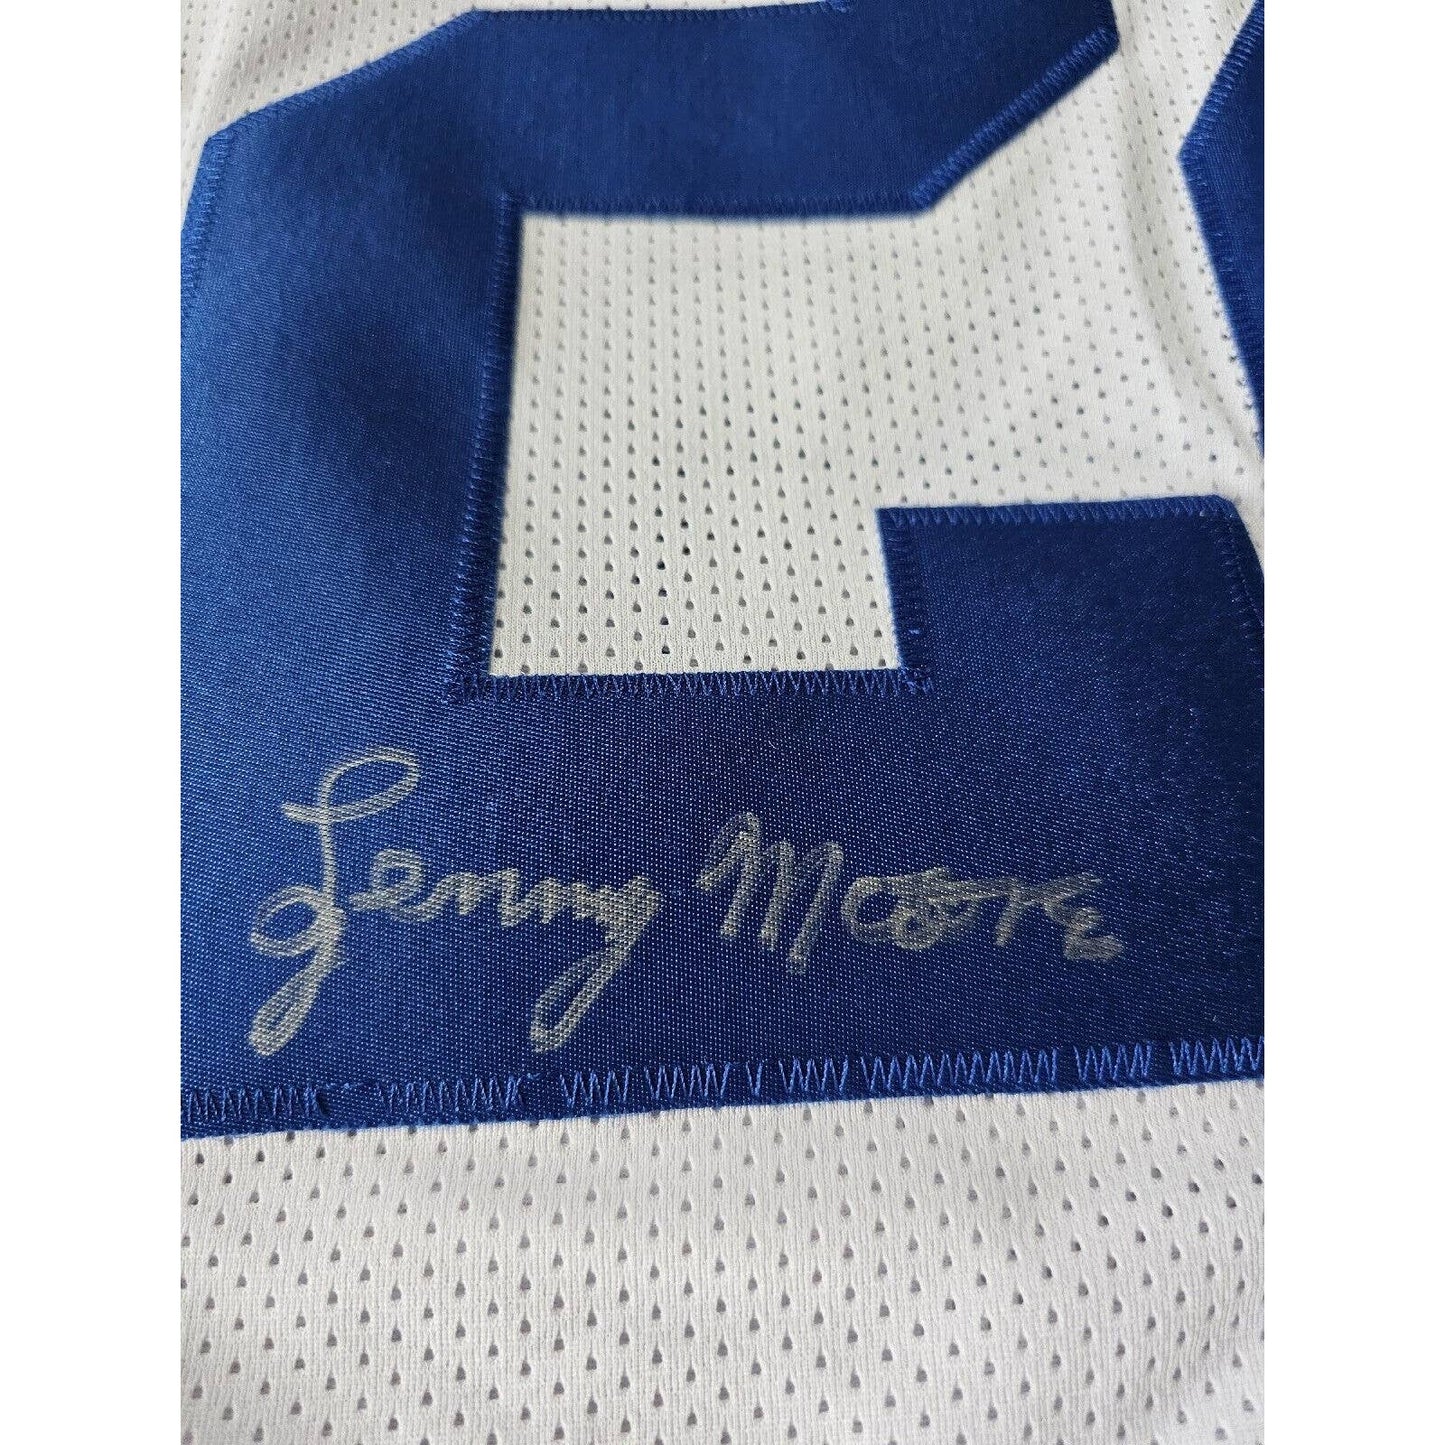 Lenny Moore Autographed/Signed Jersey JSA COA Baltimore Indianapolis Colts HOF